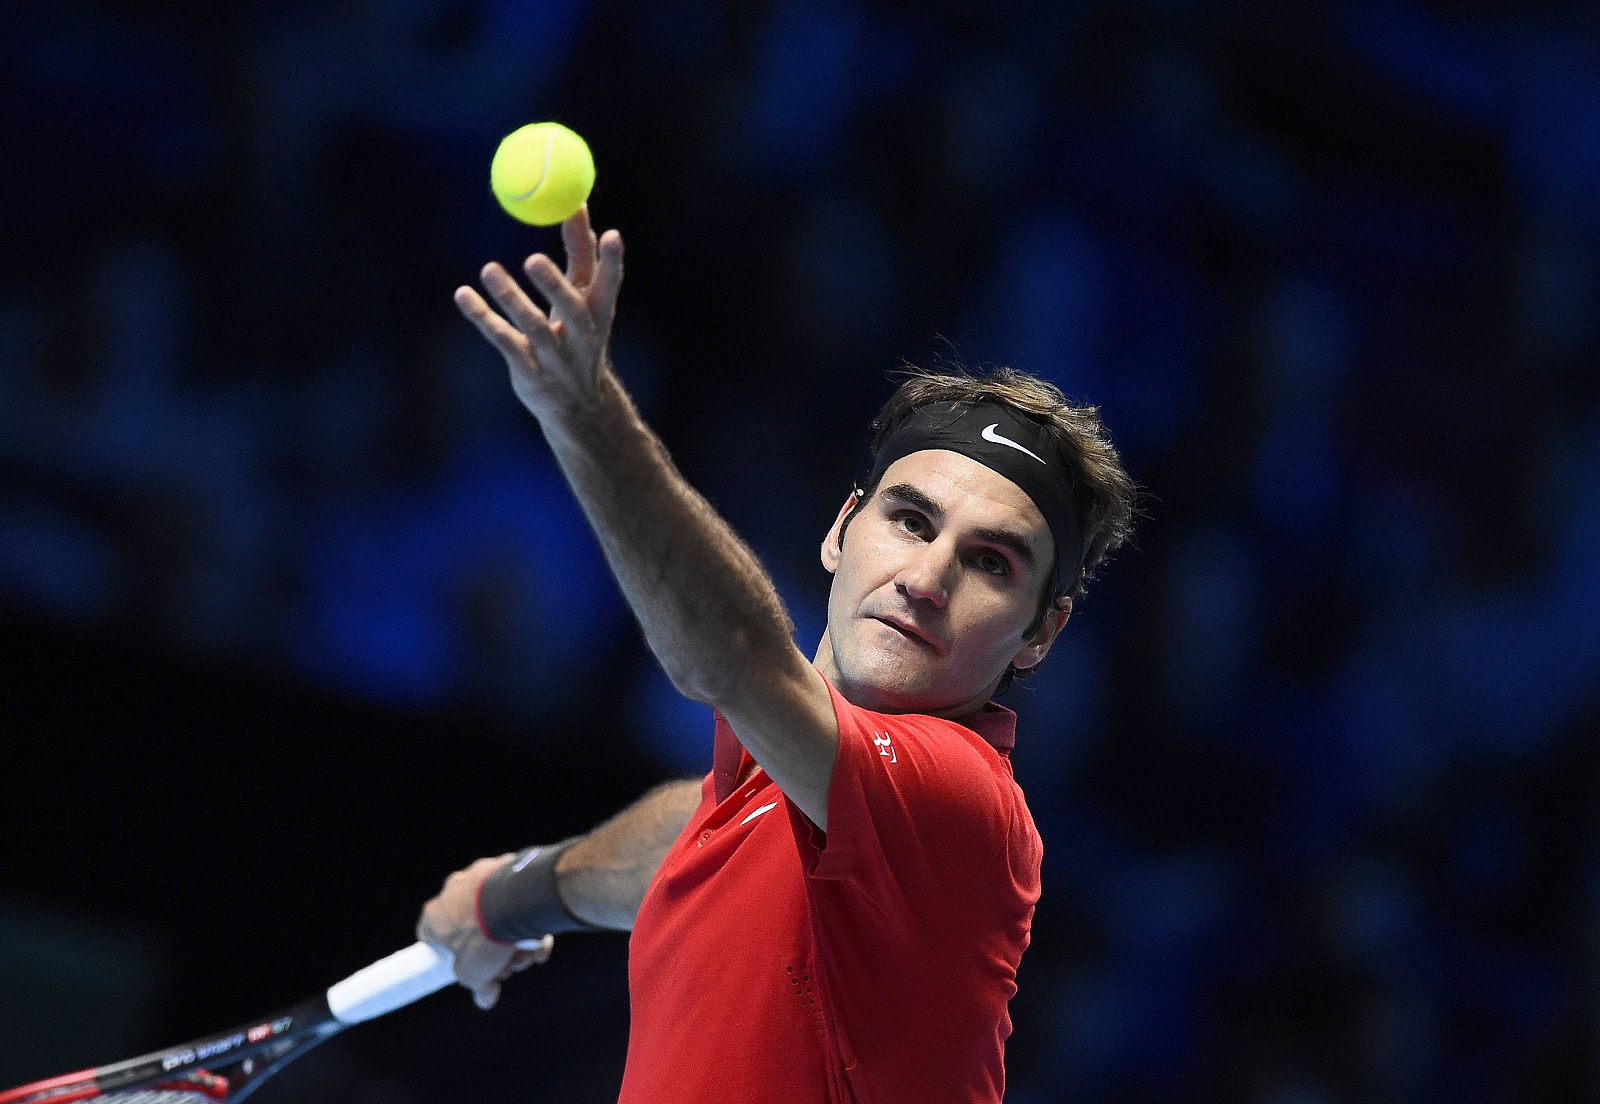 Federer of Switzerland serves during his men's singles tennis match against Raonic of Canada at the ATP World Tour Finals at the O2 Arena in London